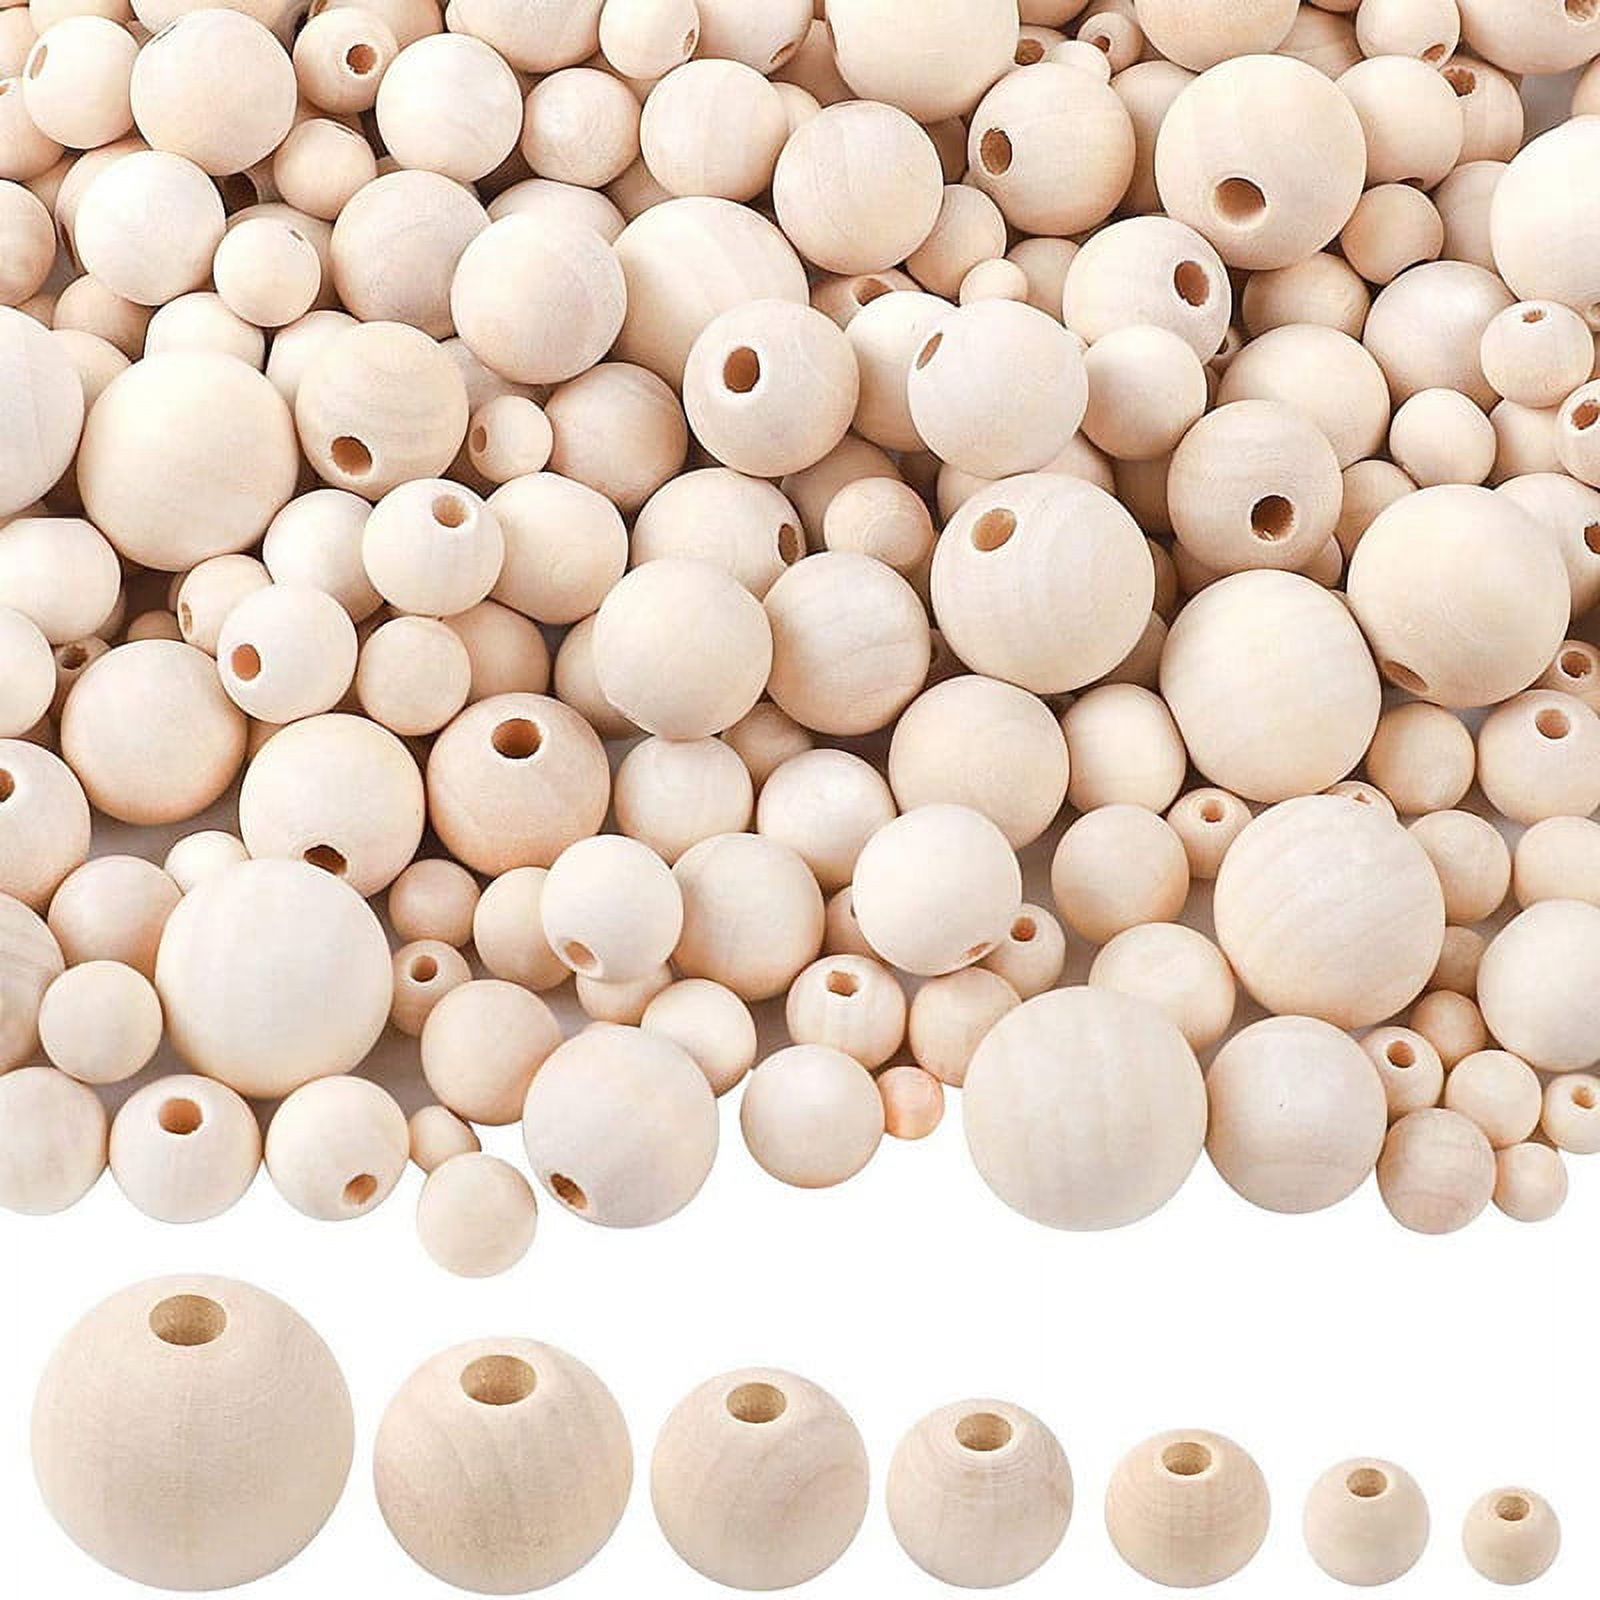 340 Pcs] Natural Wooden Beads 7 Sizes 8mm to 20 mm Beads for Crafts,  Assorted Small to Large Bulk Beads Unfinished Round Bead for Jewelry,  Garland, Macrame, Home Decor & DIY 